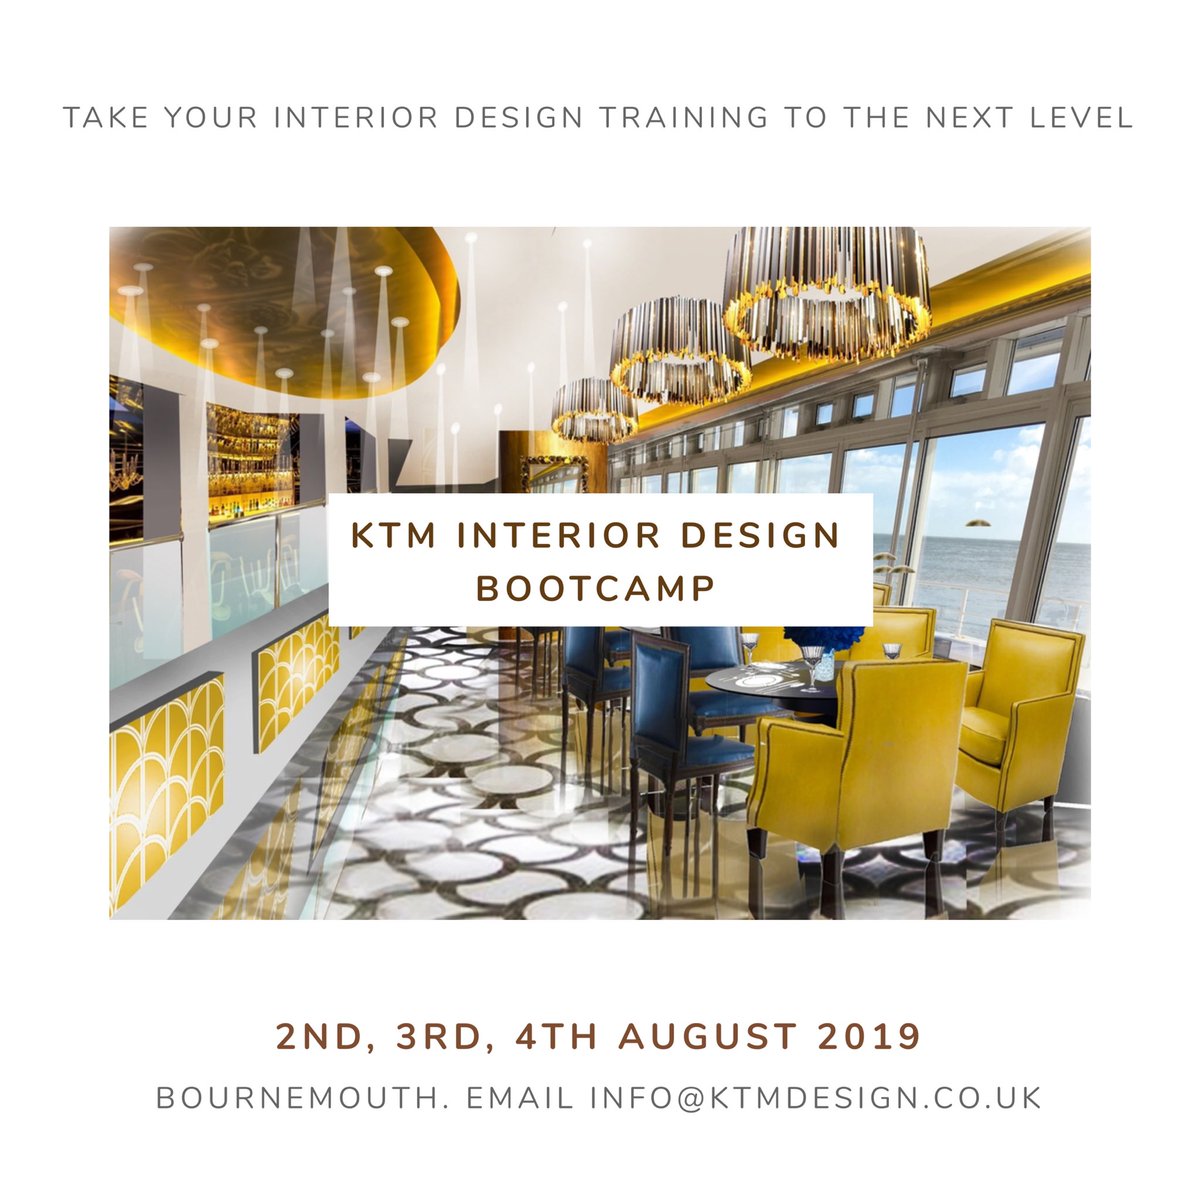 Following on from the success of this weekend’s Interior Design Bootcamp, the next one is 2nd -4th August. Sign up now! #interiordesign #interiordesignschool #interiordesigncourse #interiordesigner